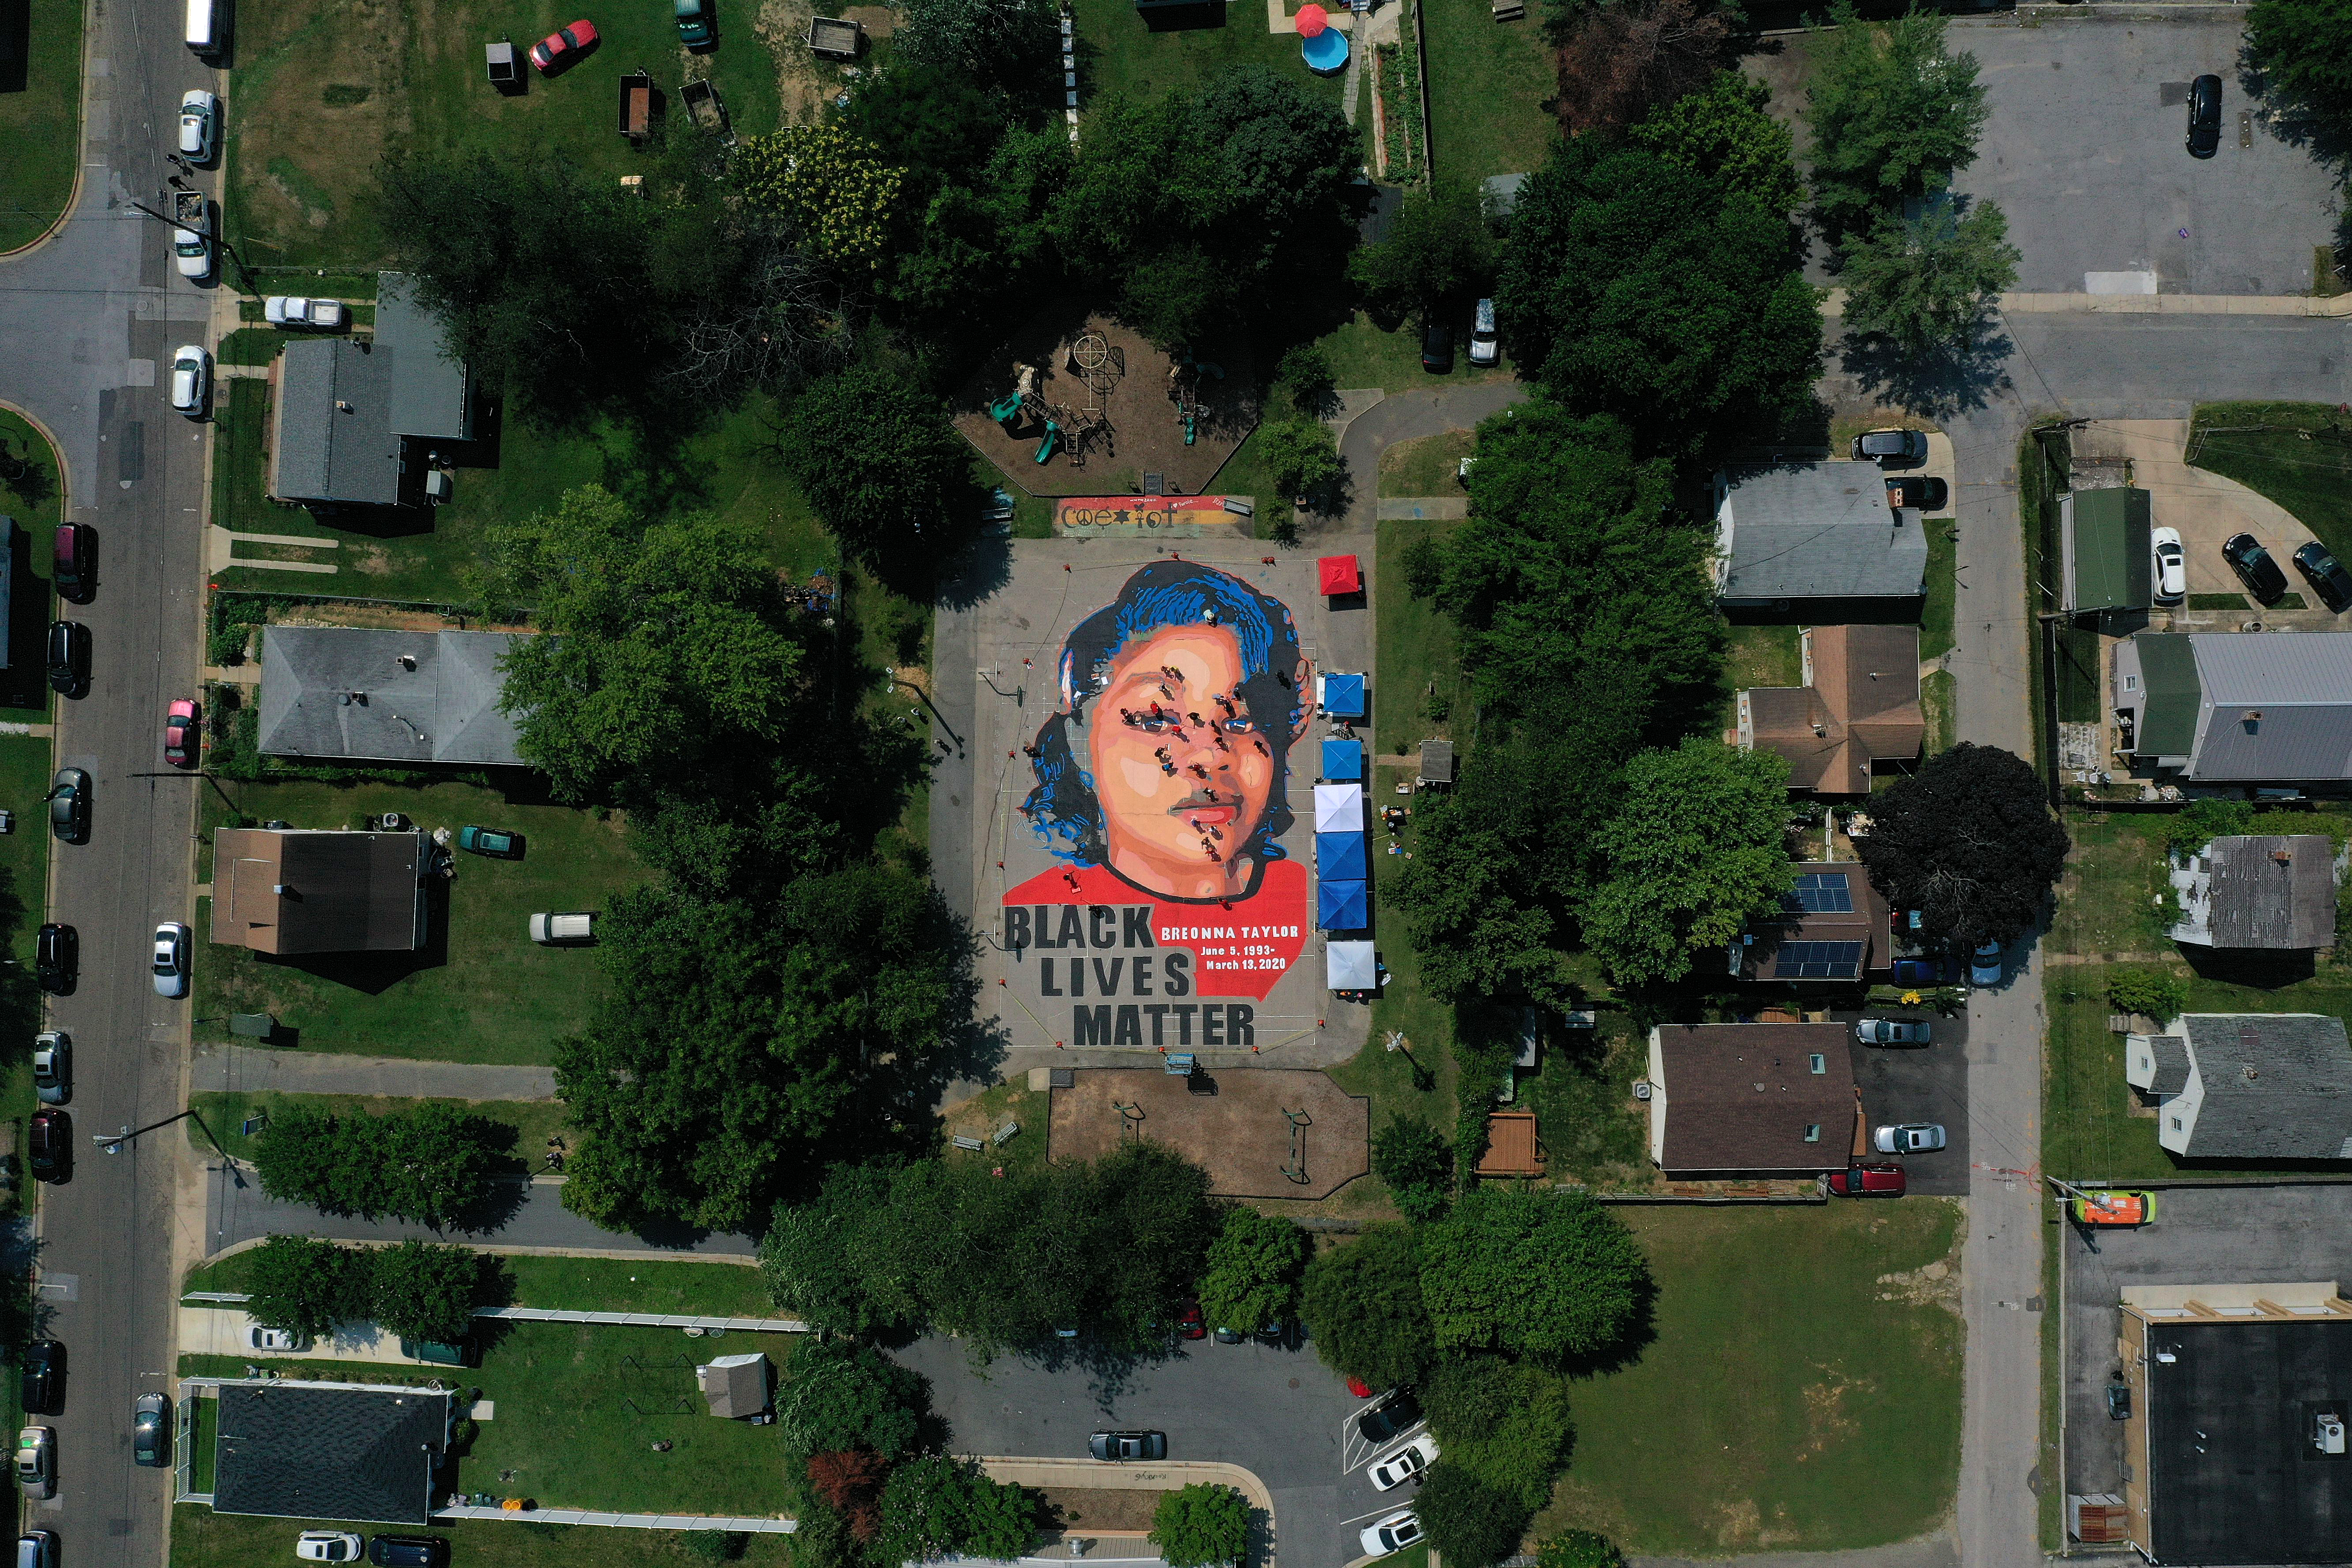 An aerial view of a large-scale ground mural depicting Breonna Taylor with the text "Black Lives Matter"